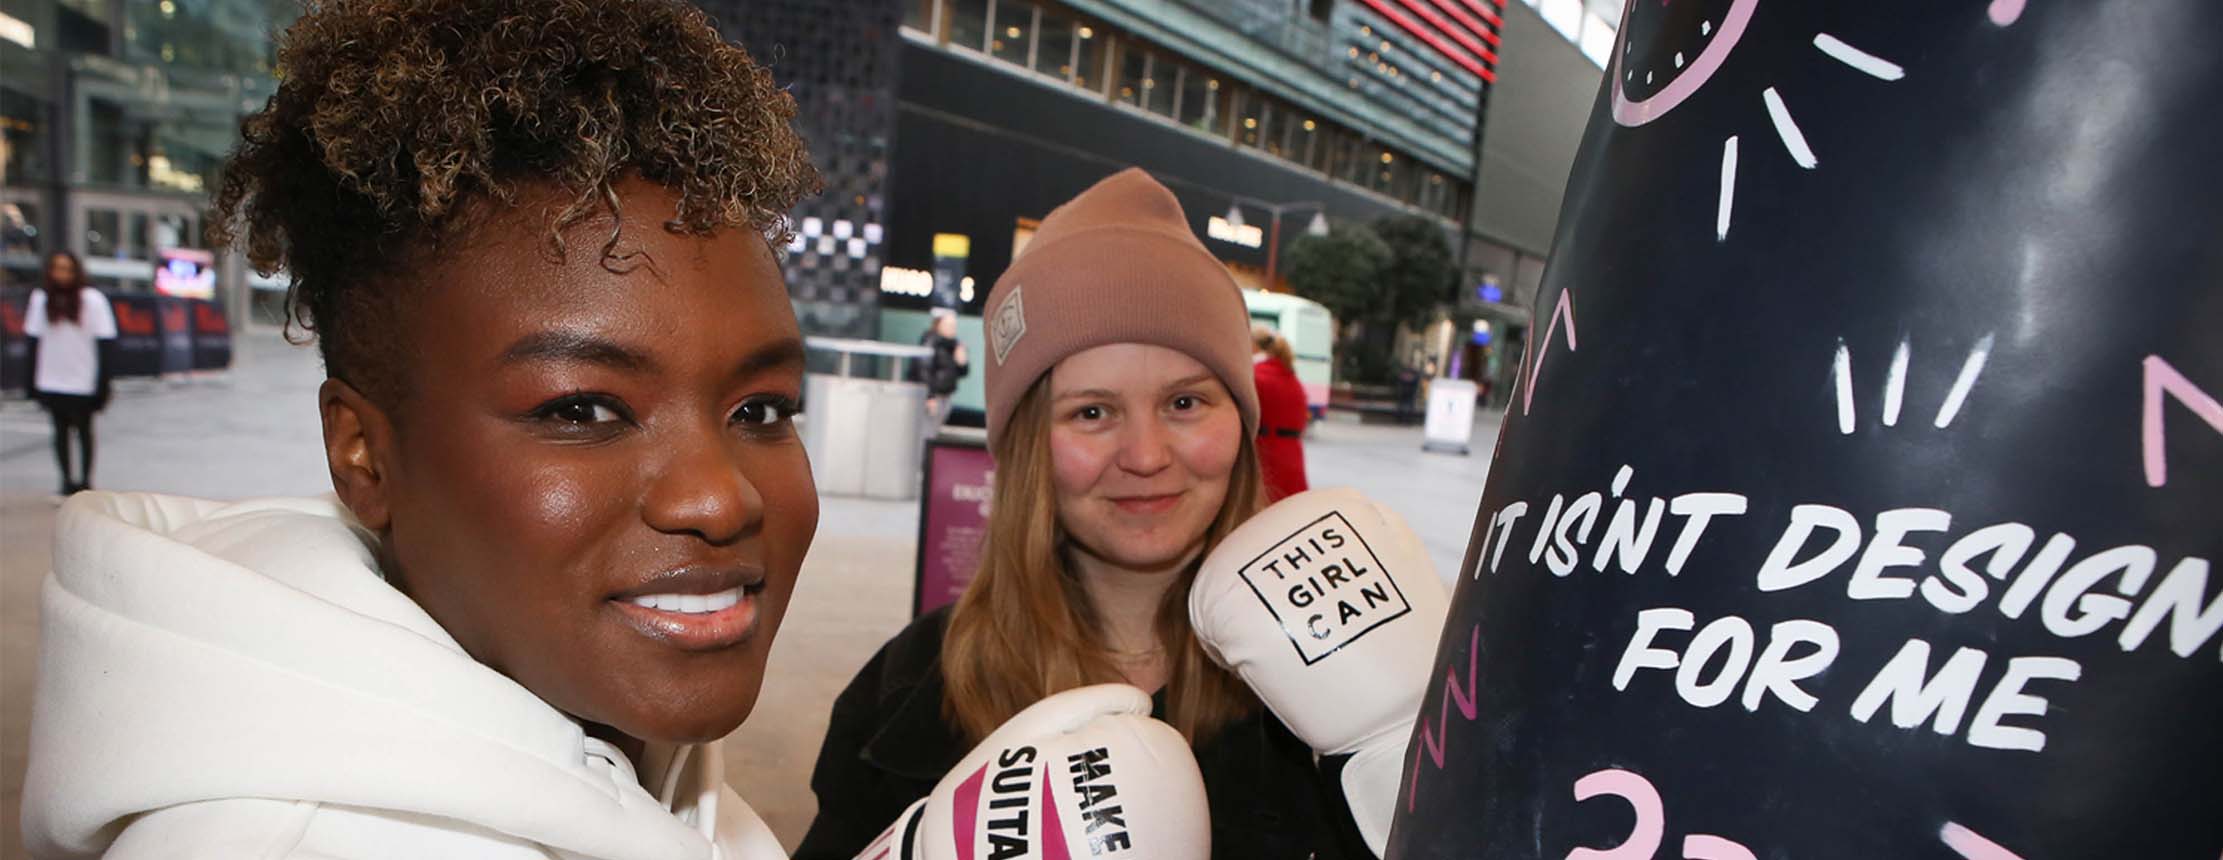 Nicola adams this girl can